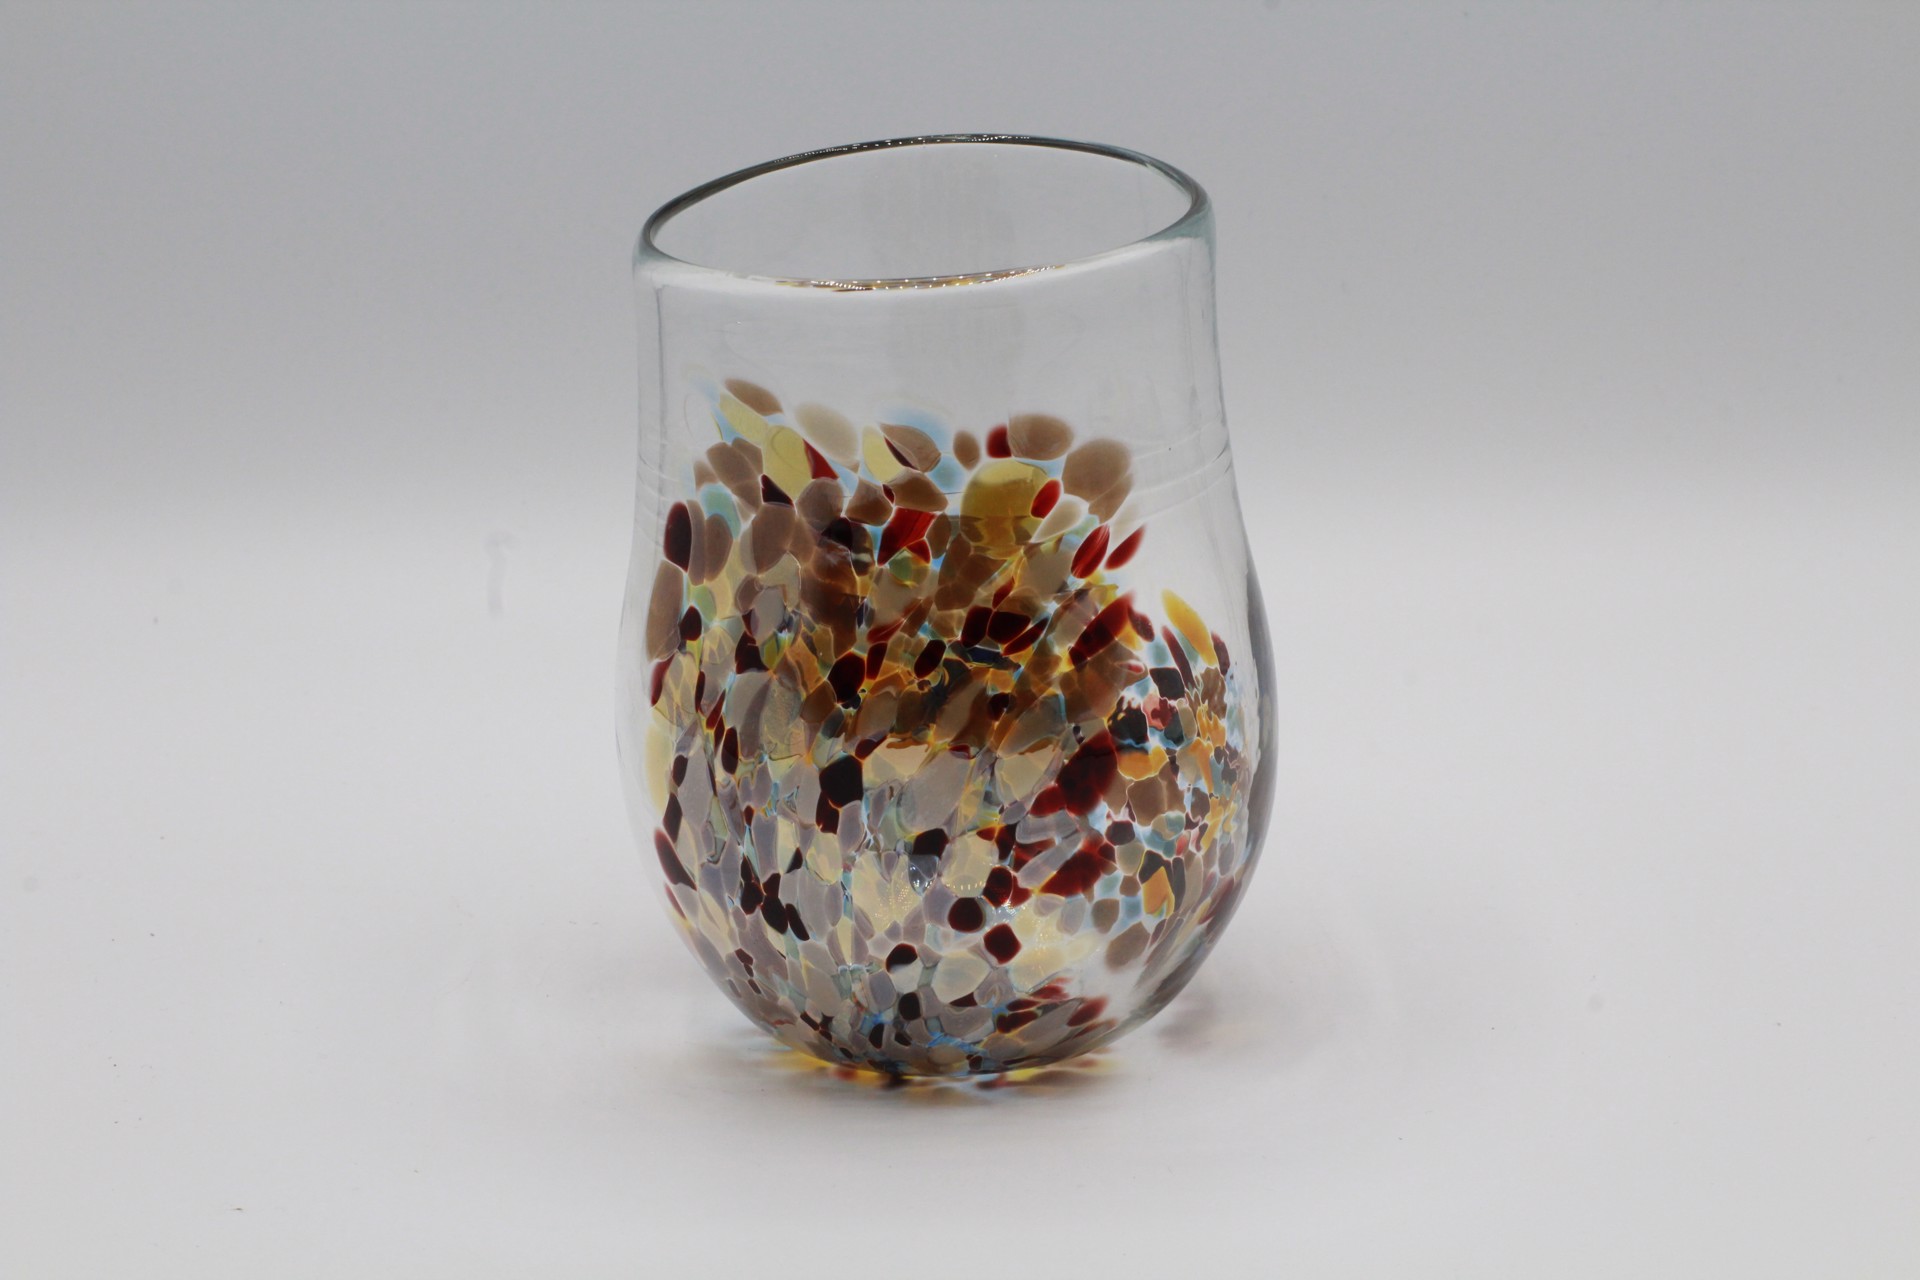 Amber Rounded Hand Blown Glass by Katie Sisum